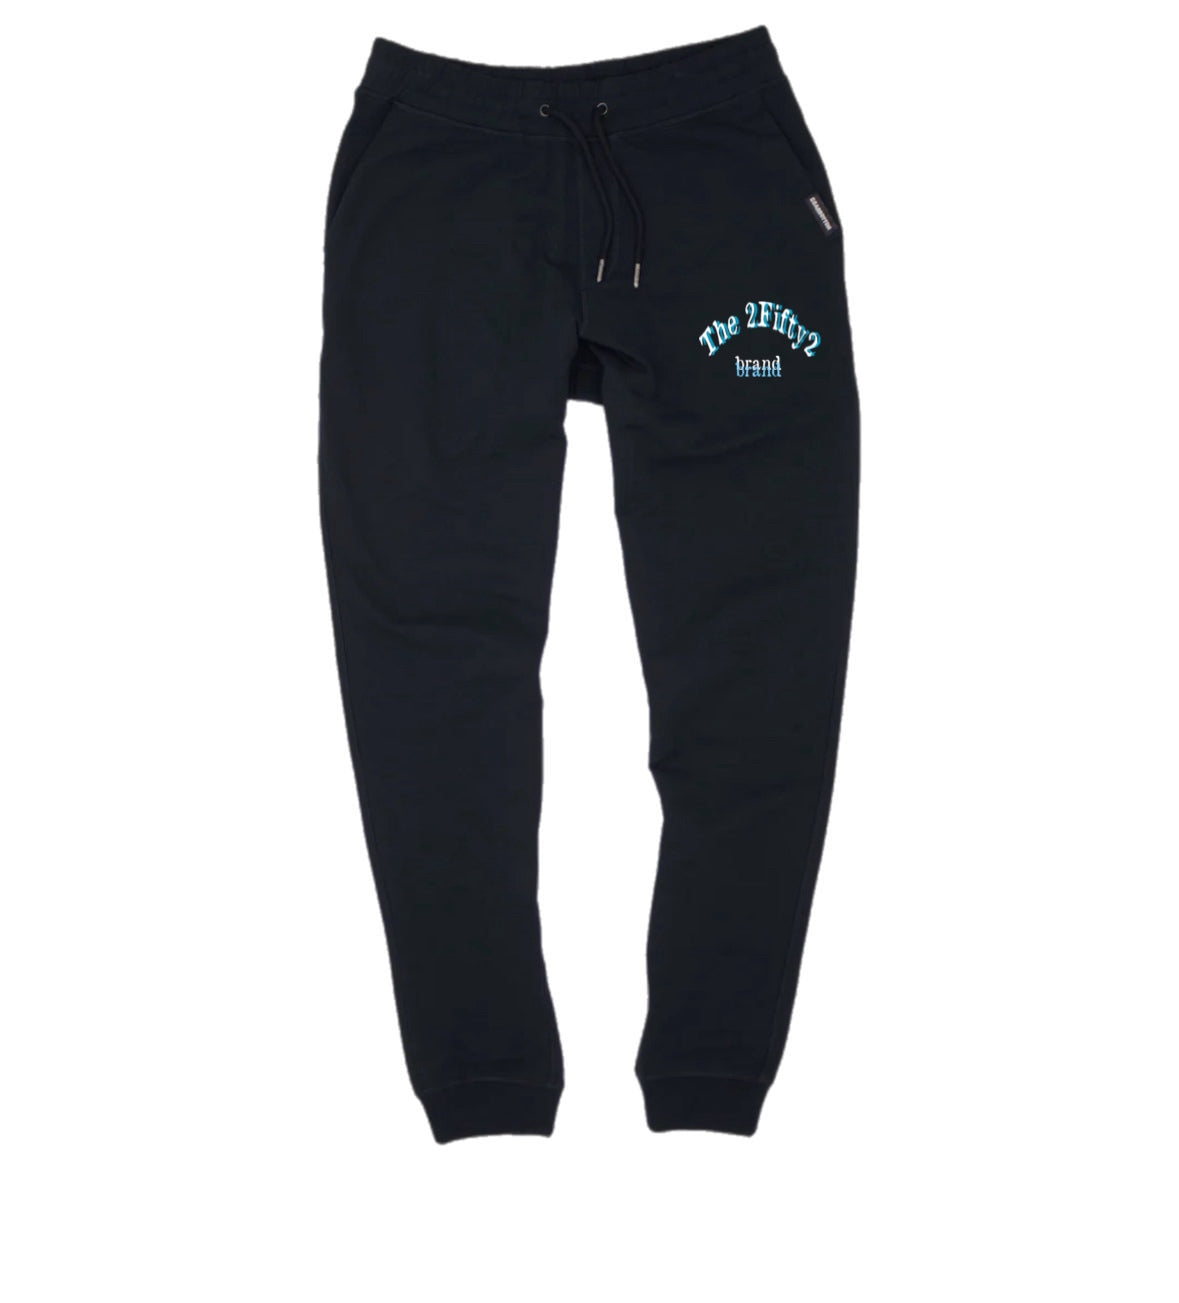 Men’s joggers sweatsuit by The 2fifty2 brand